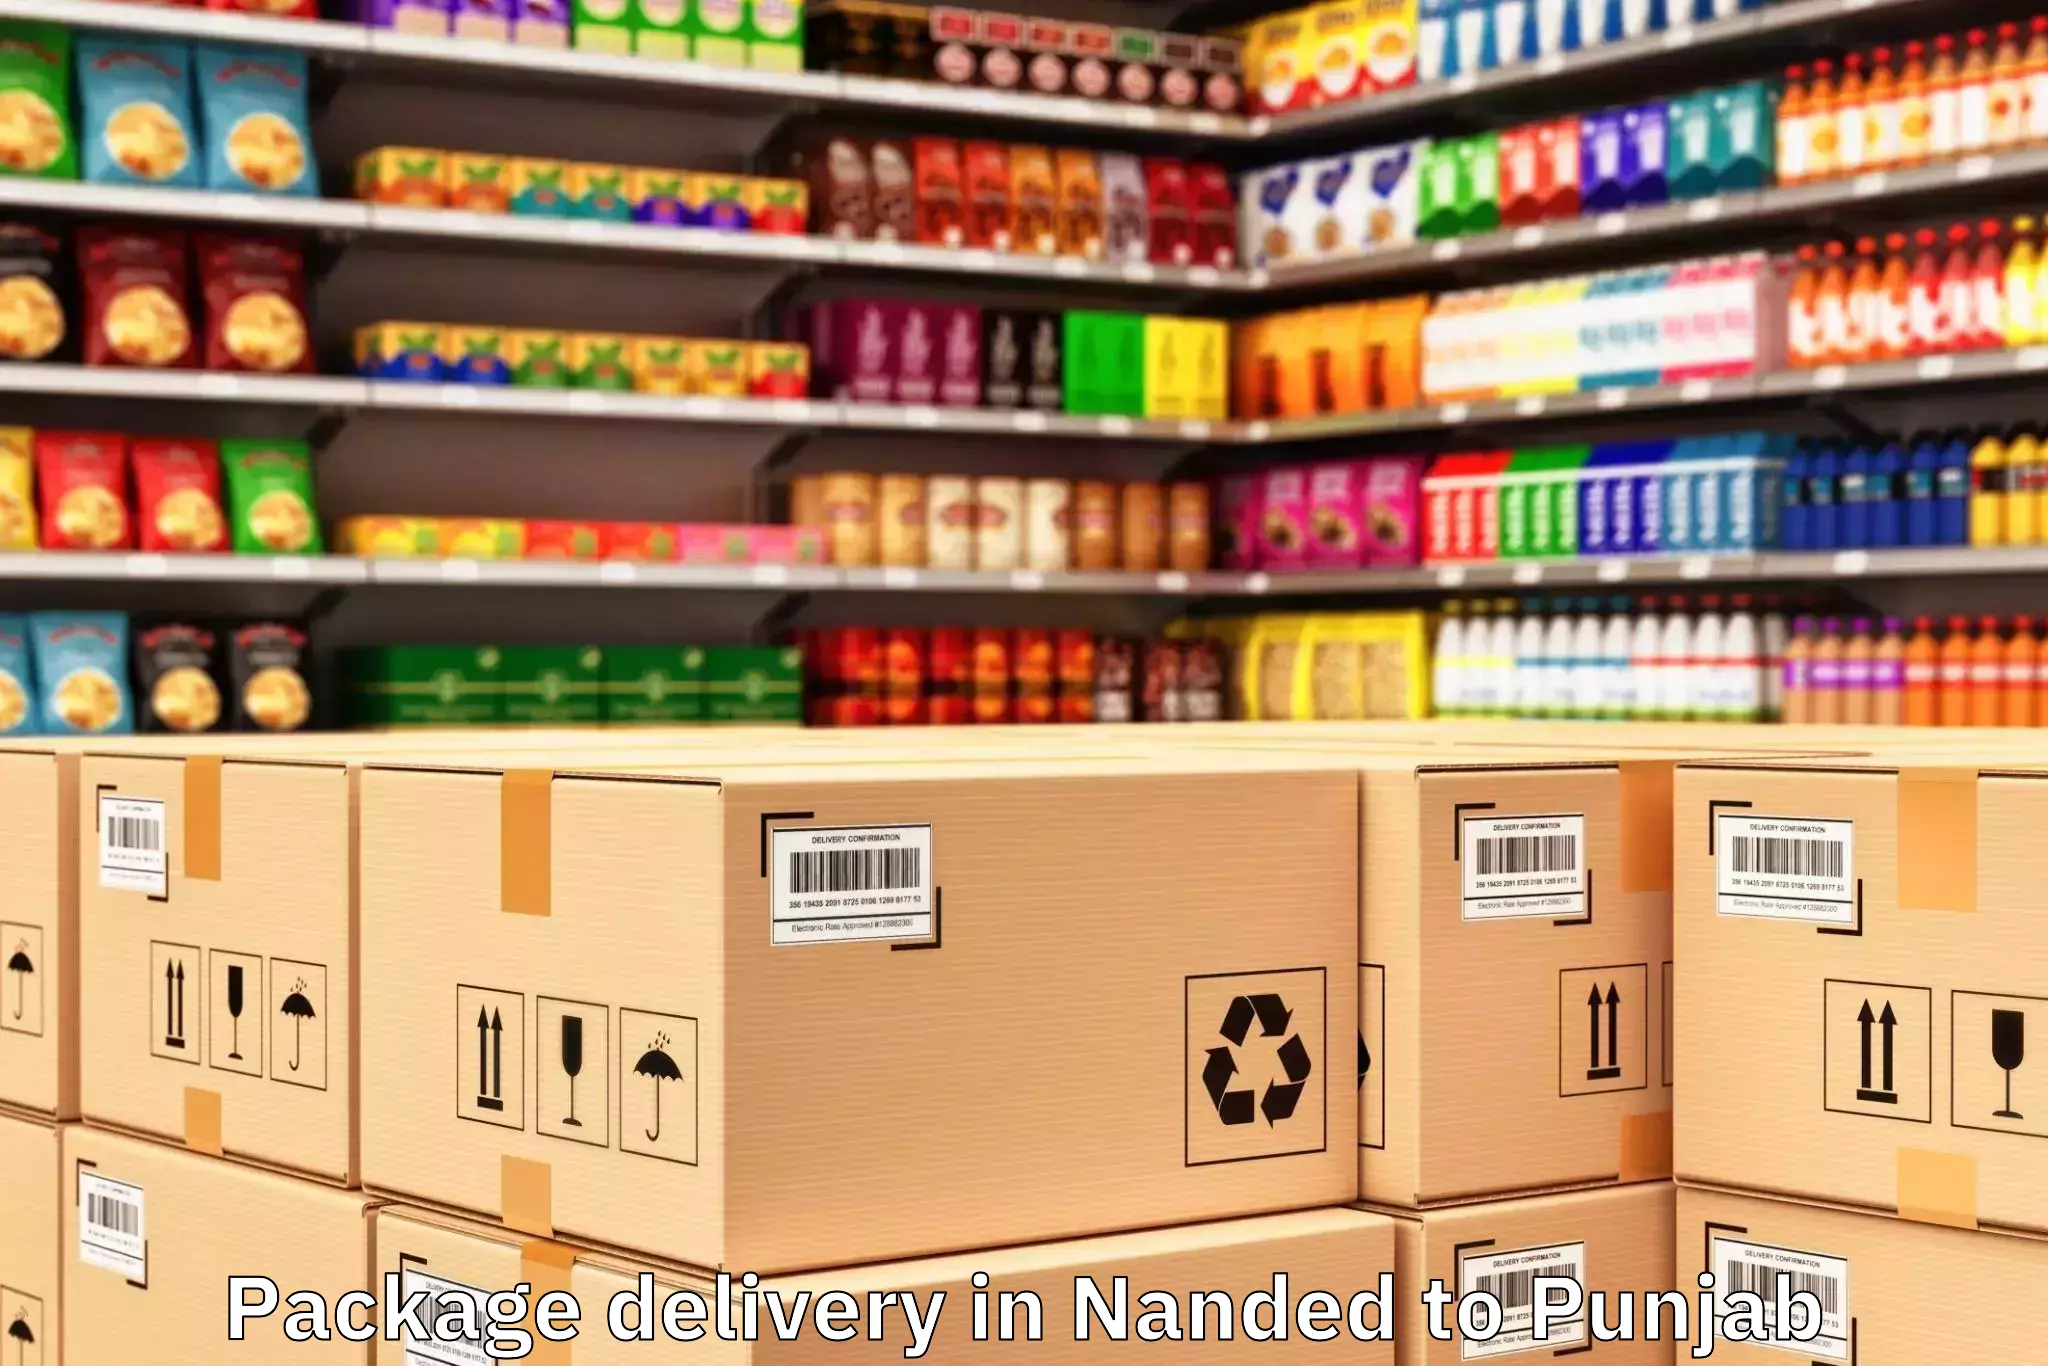 Nanded to Punjab Technical University Kapurthala Package Delivery Booking